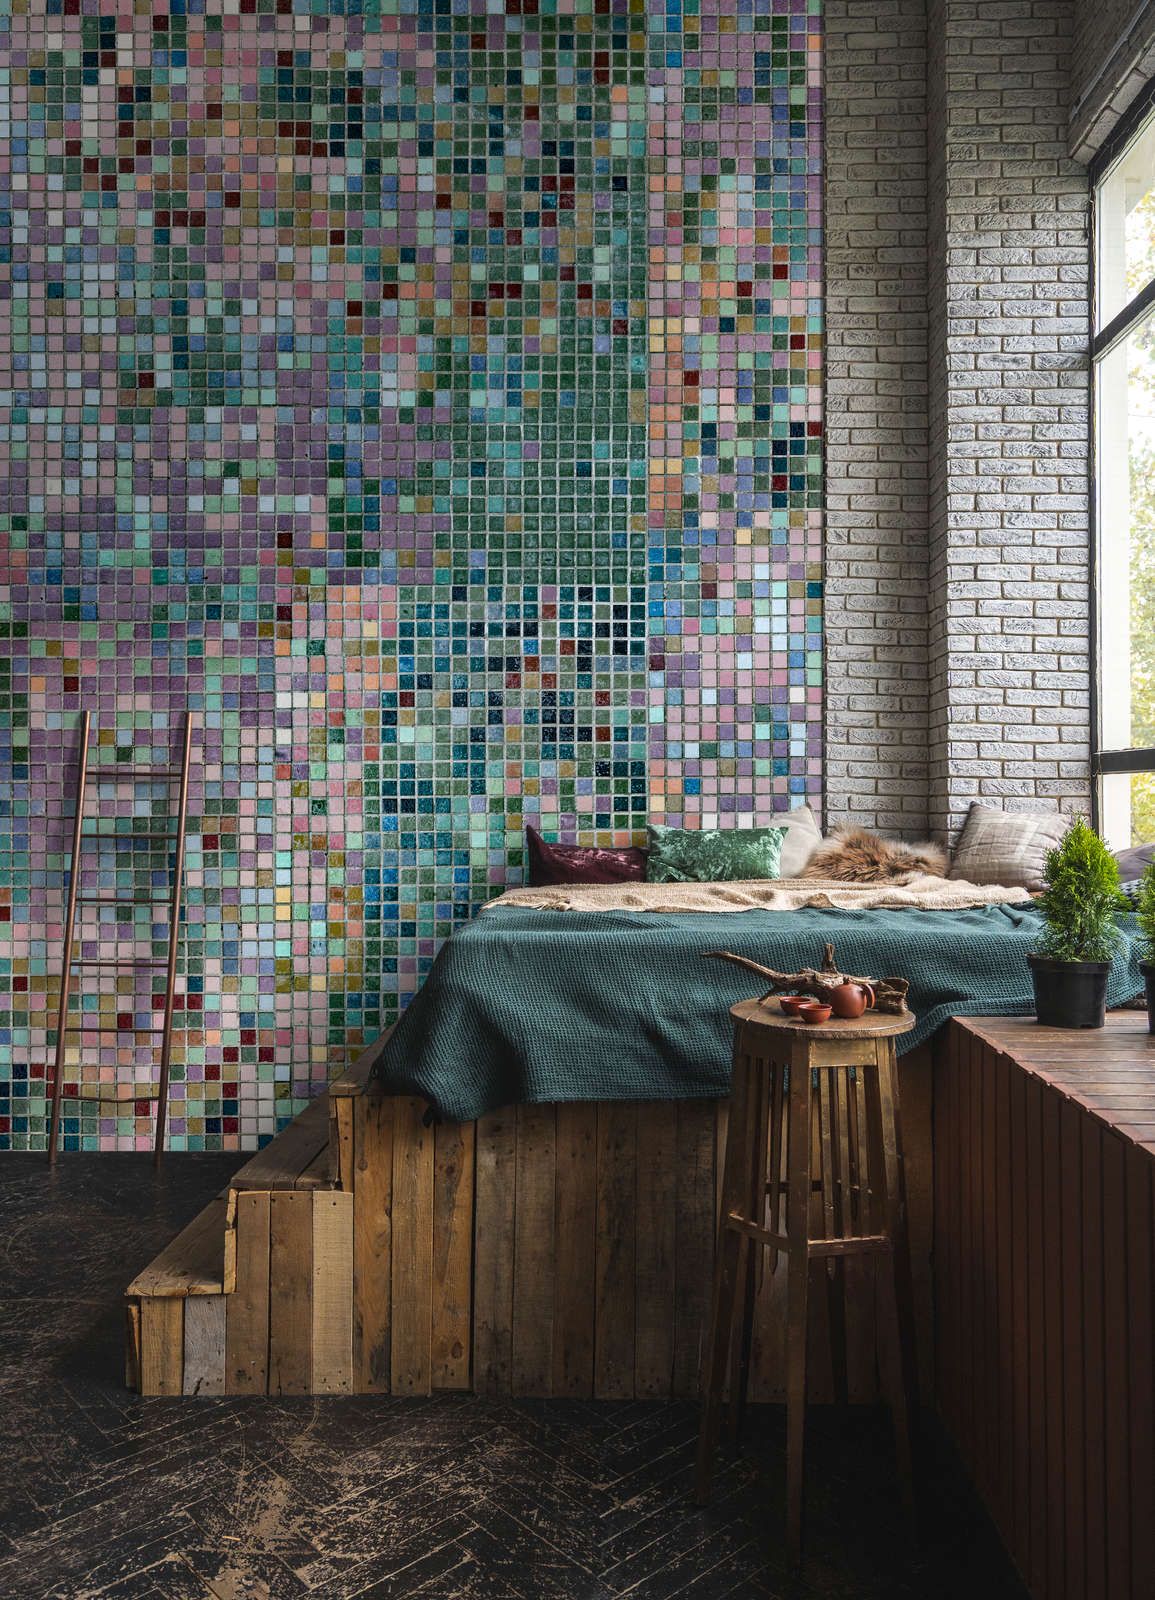             Photo wallpaper »grand central« - Mosaic pattern in bright colours - Smooth, slightly pearlescent non-woven fabric
        